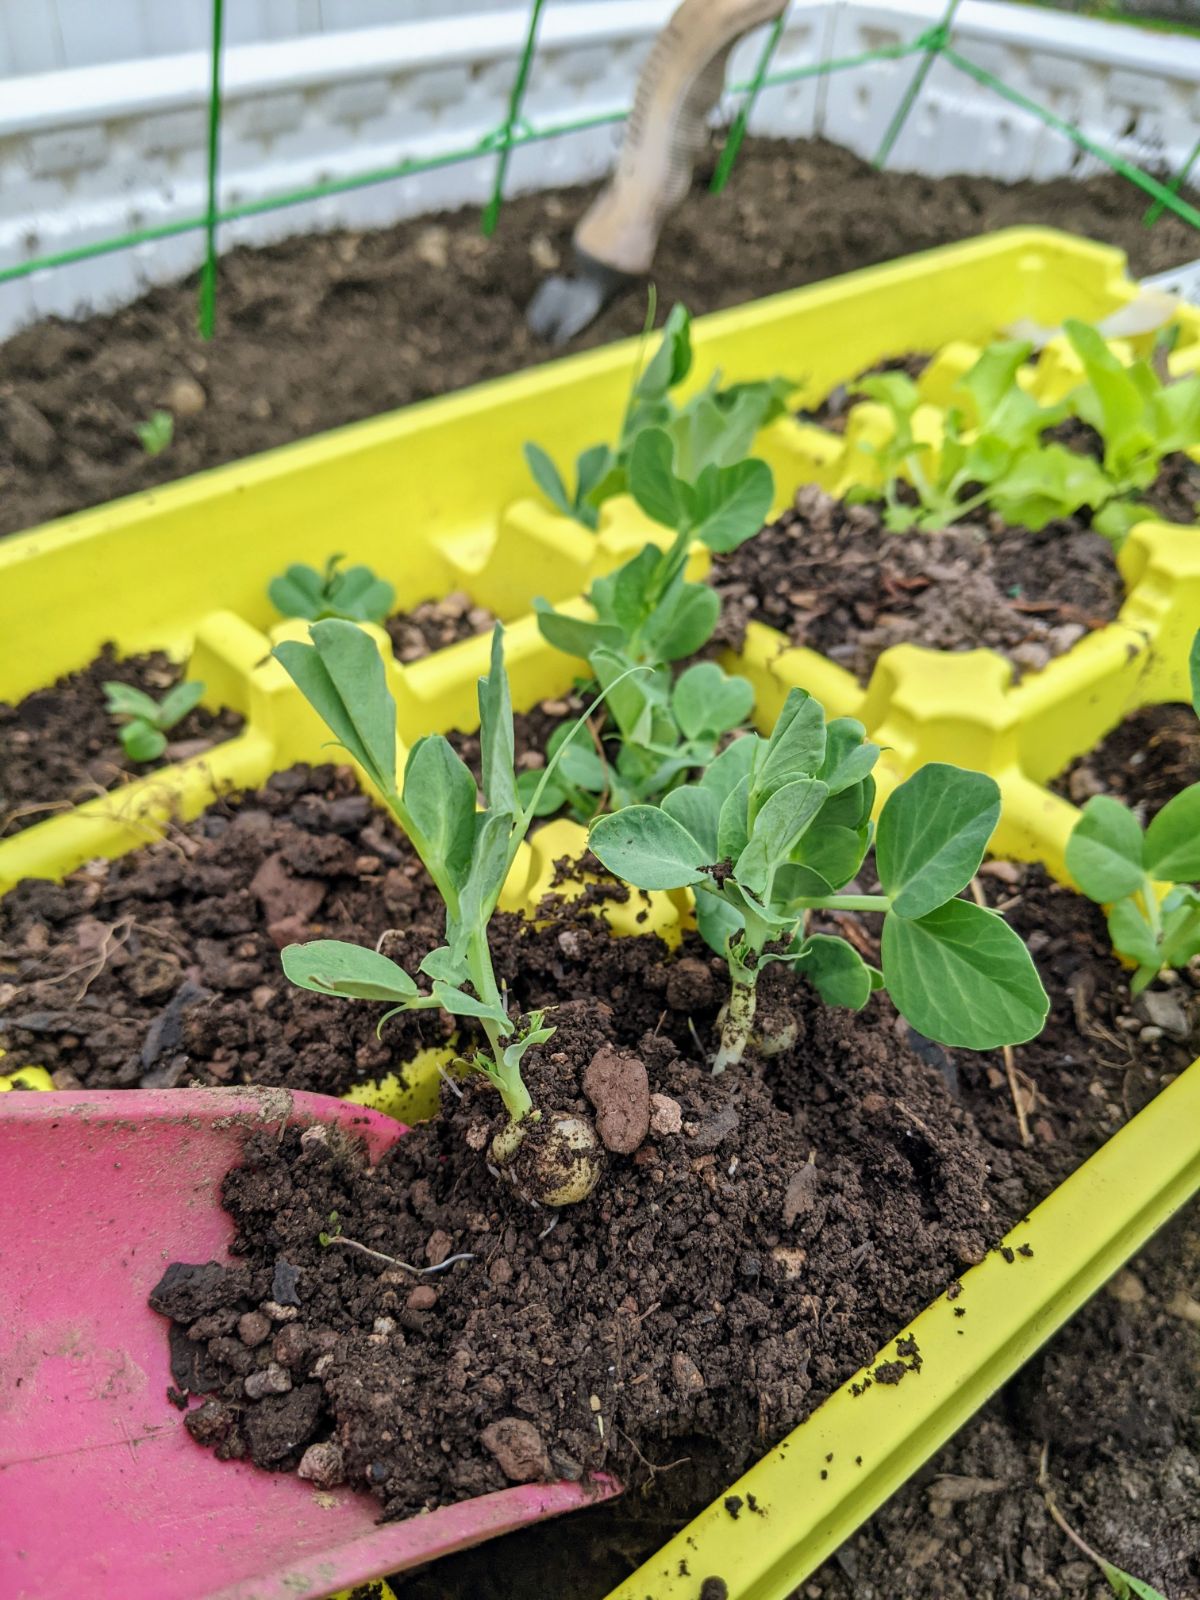 Snow pea seedlings on a pink shovel in a  yellow planting tray